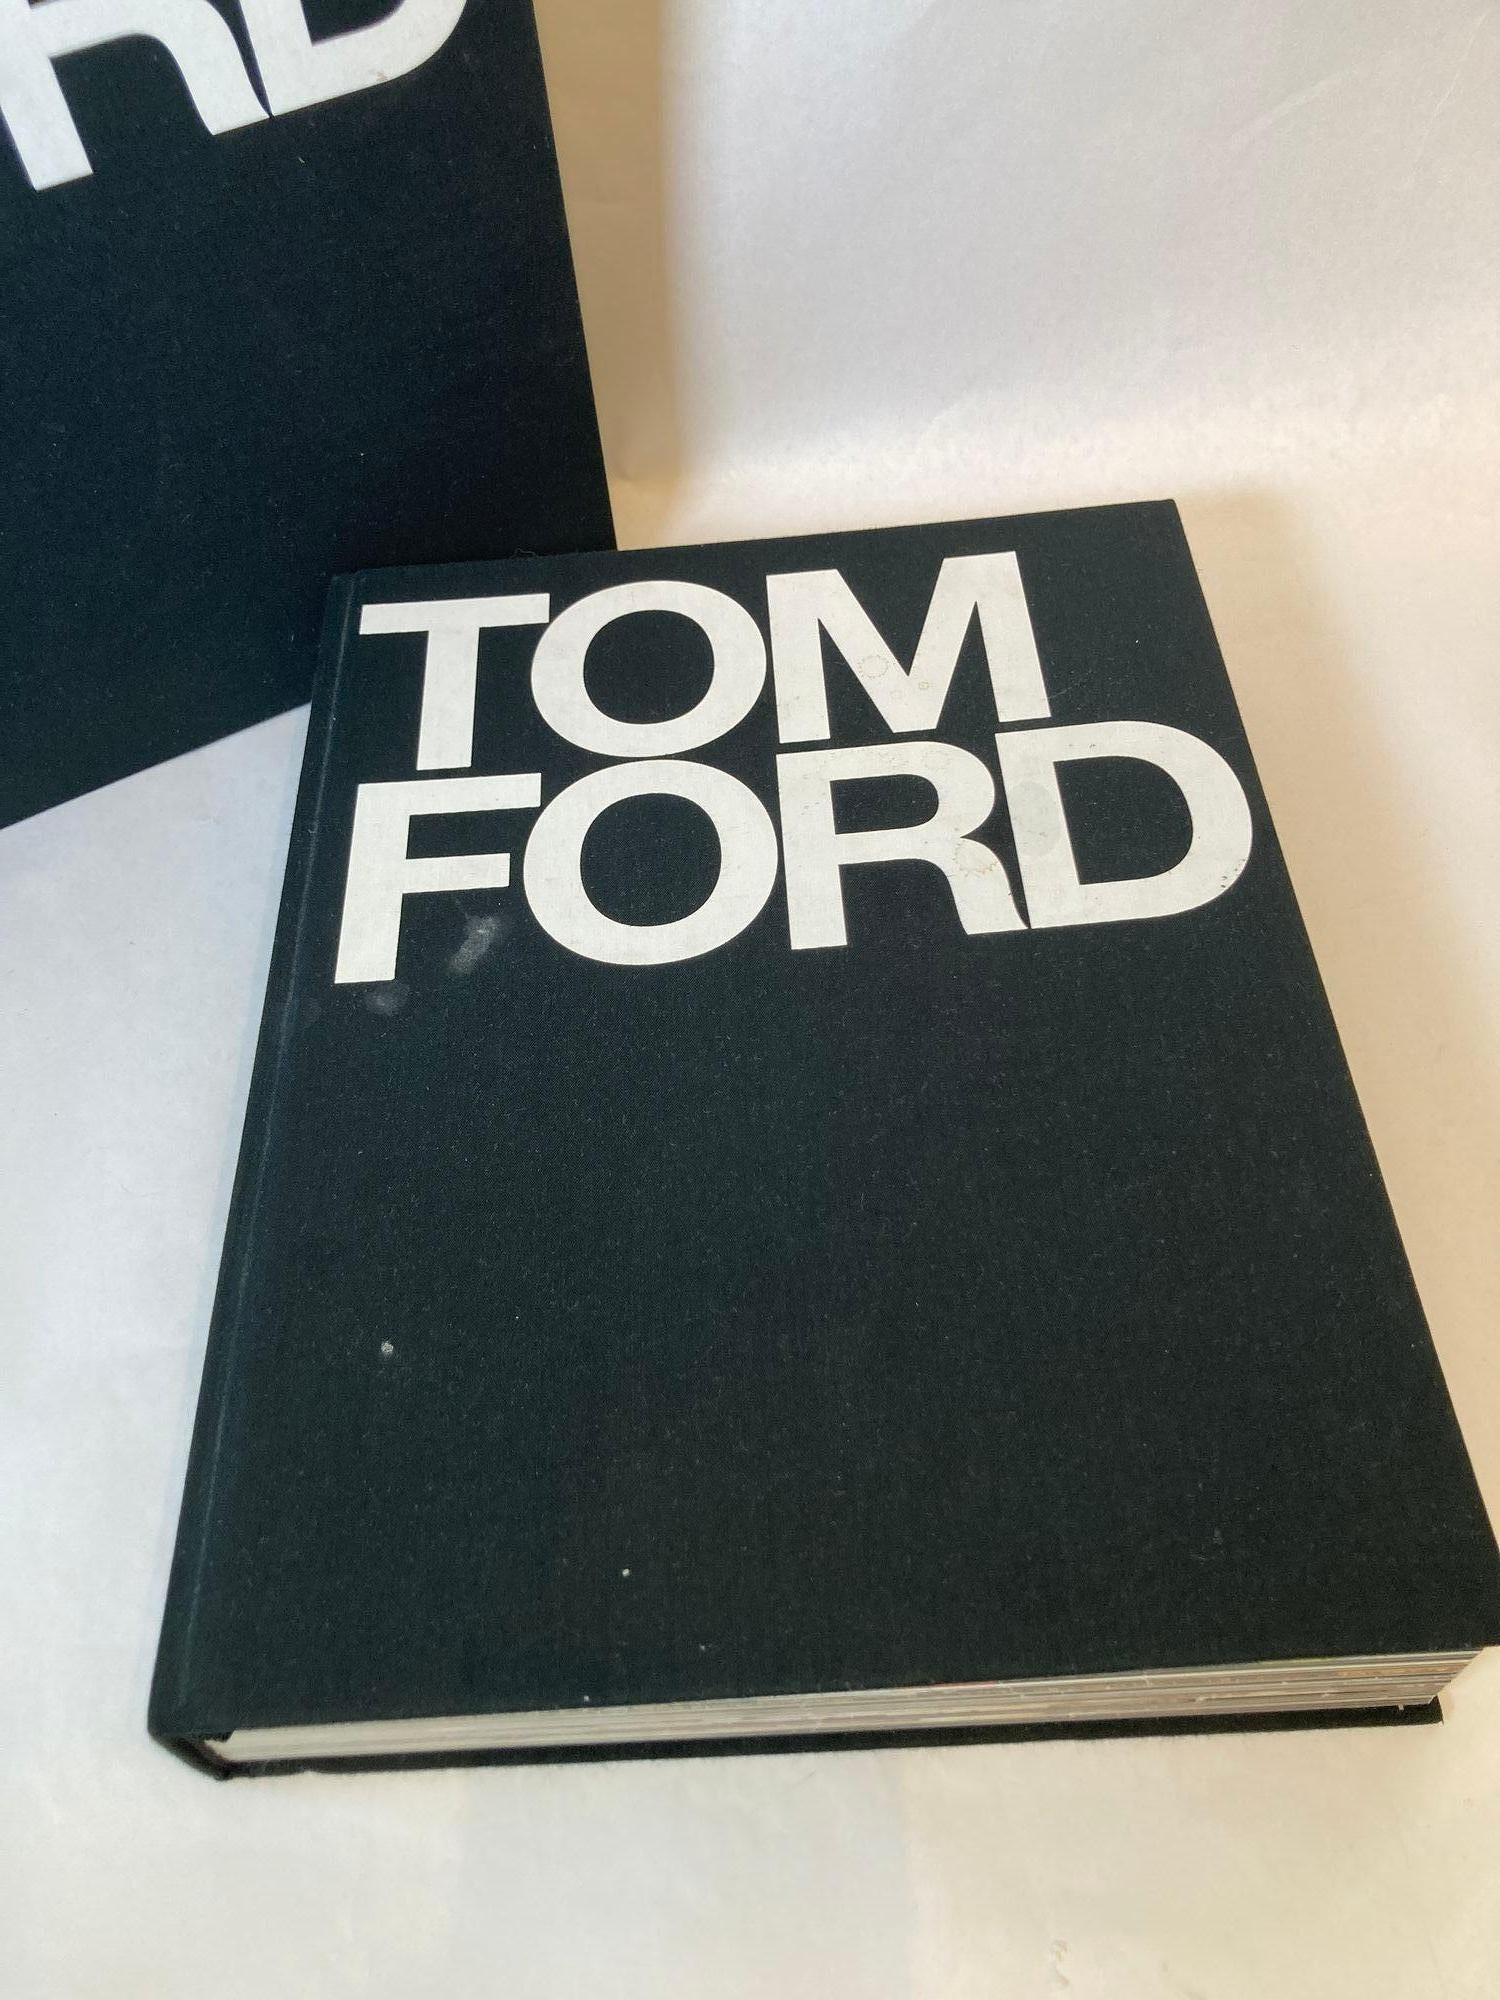 tom ford hardcover book